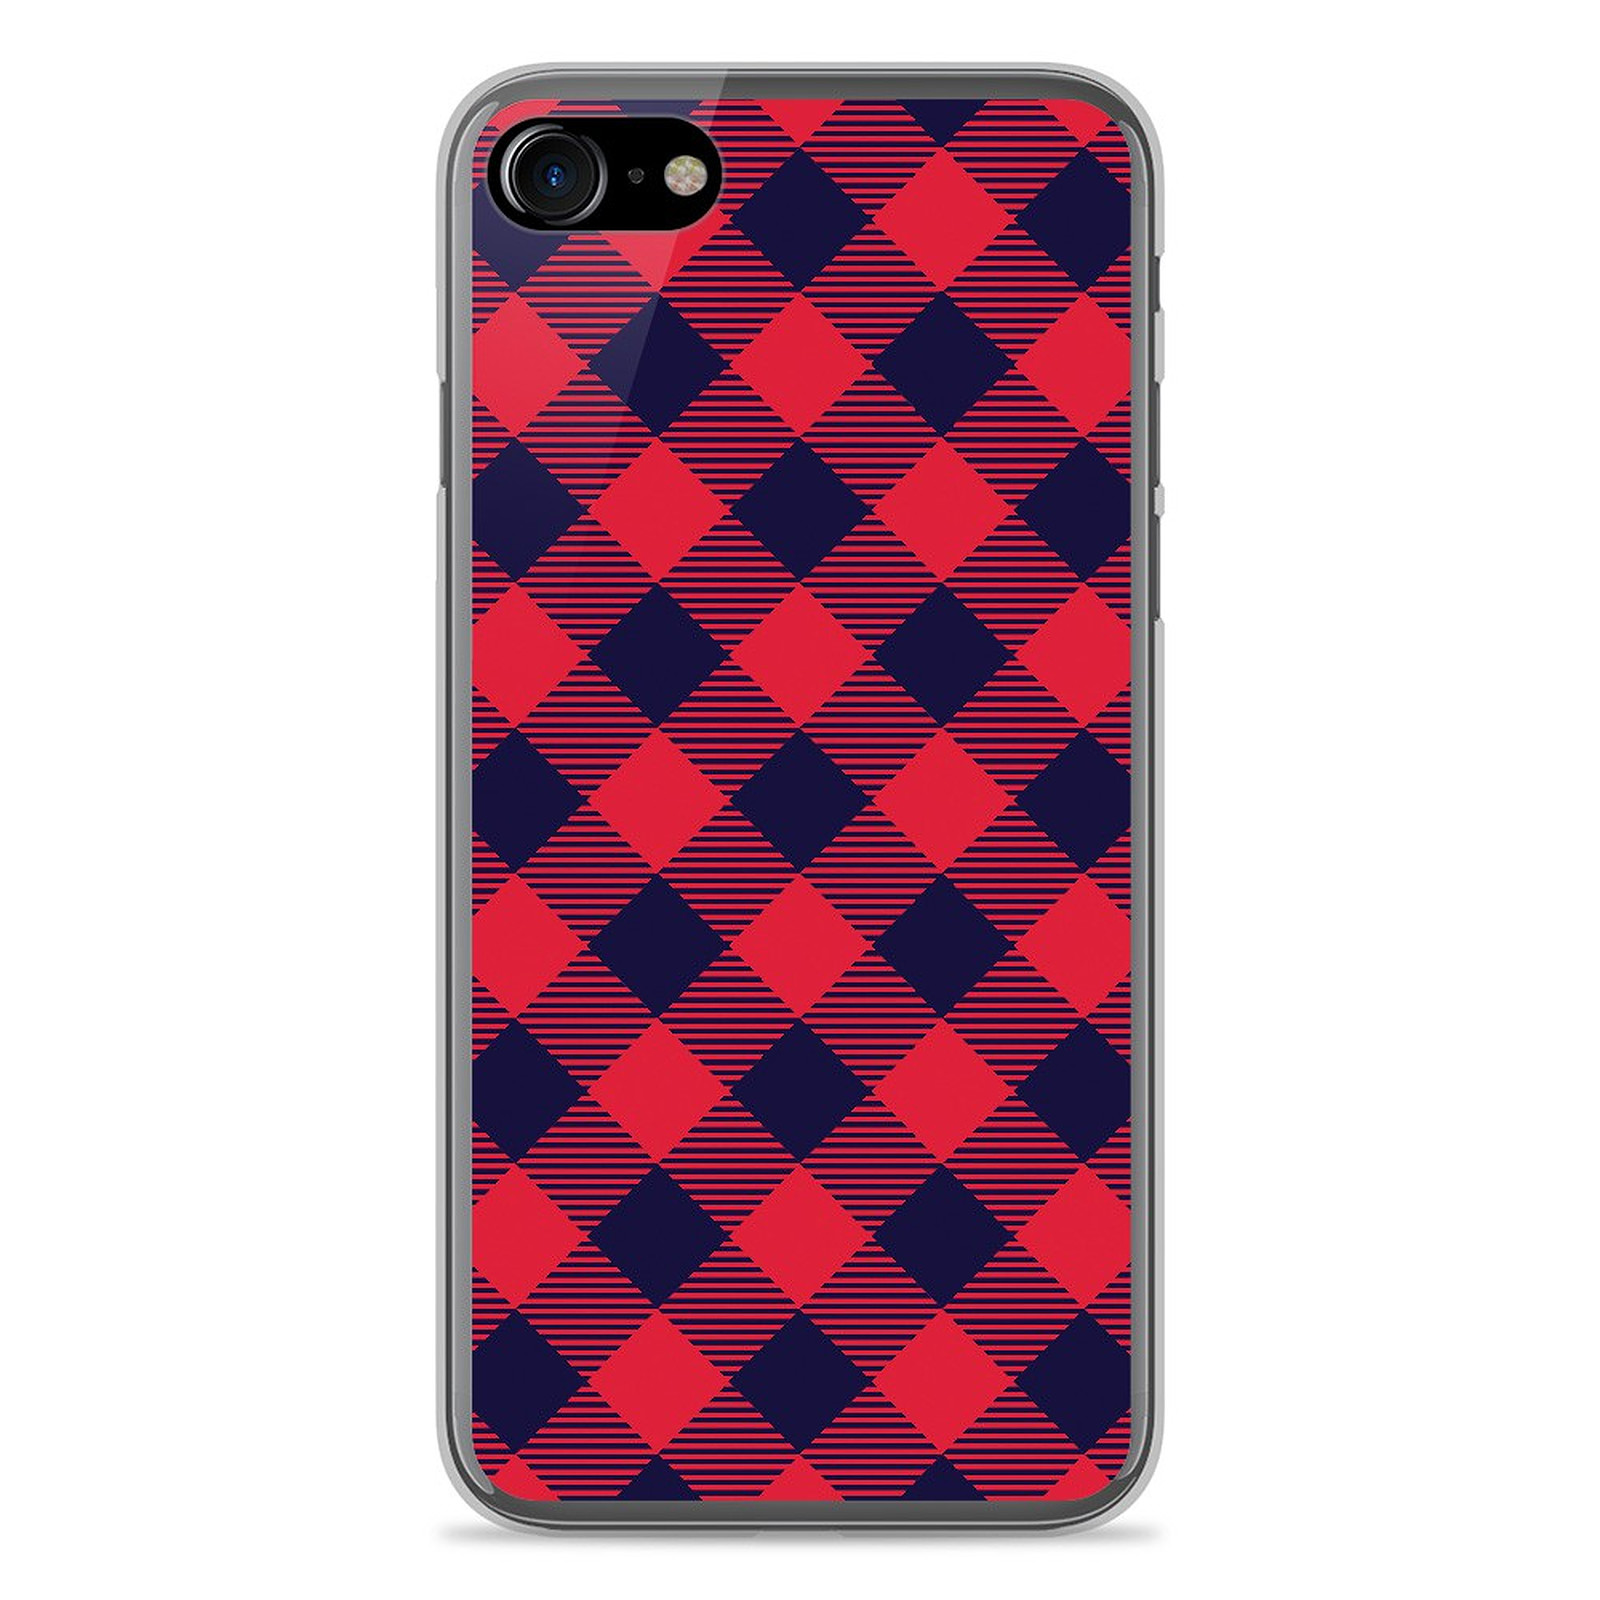 1001 Coques Coque silicone gel Apple IPhone 8 motif Tartan Rouge - Coque telephone 1001Coques